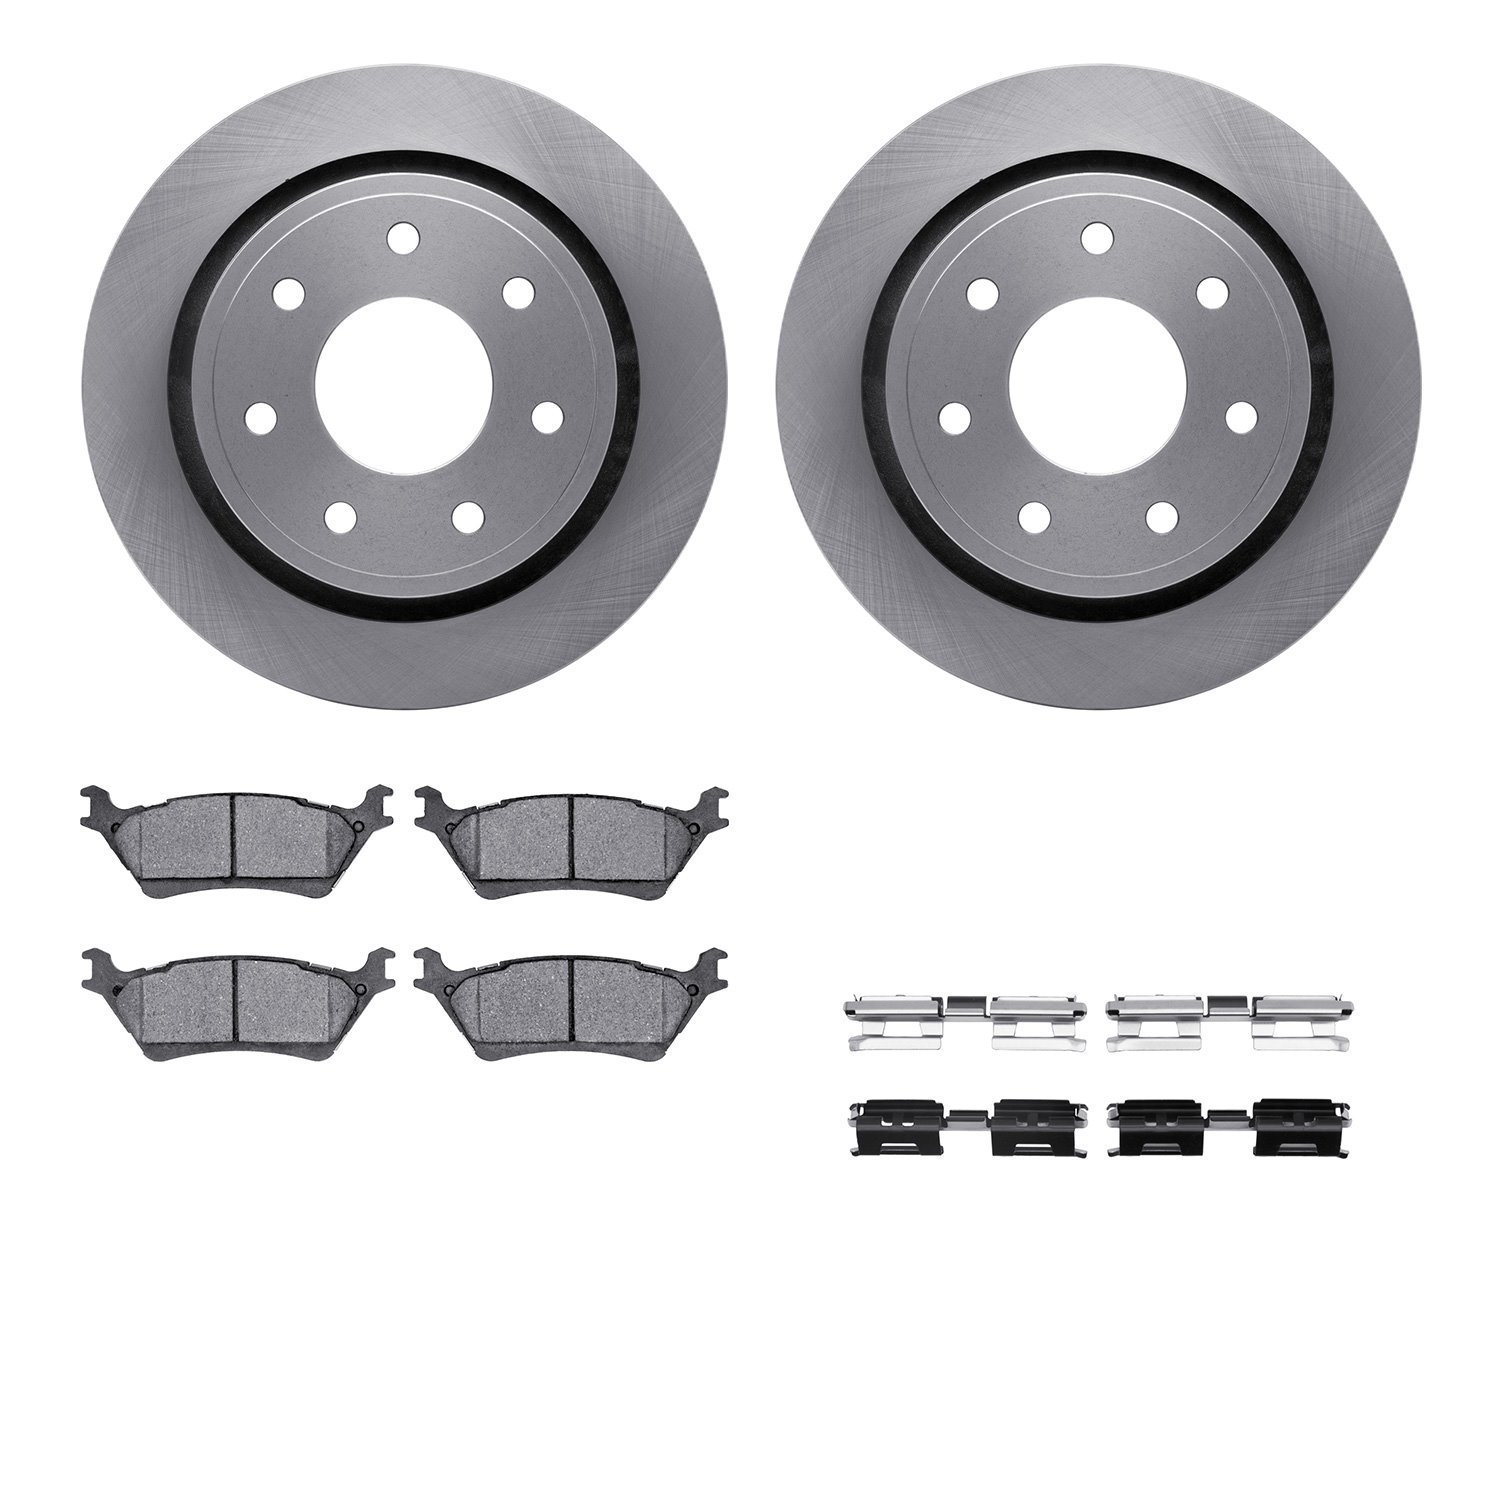 6312-54208 Brake Rotors with 3000-Series Ceramic Brake Pads Kit with Hardware, 2012-2014 Ford/Lincoln/Mercury/Mazda, Position: R